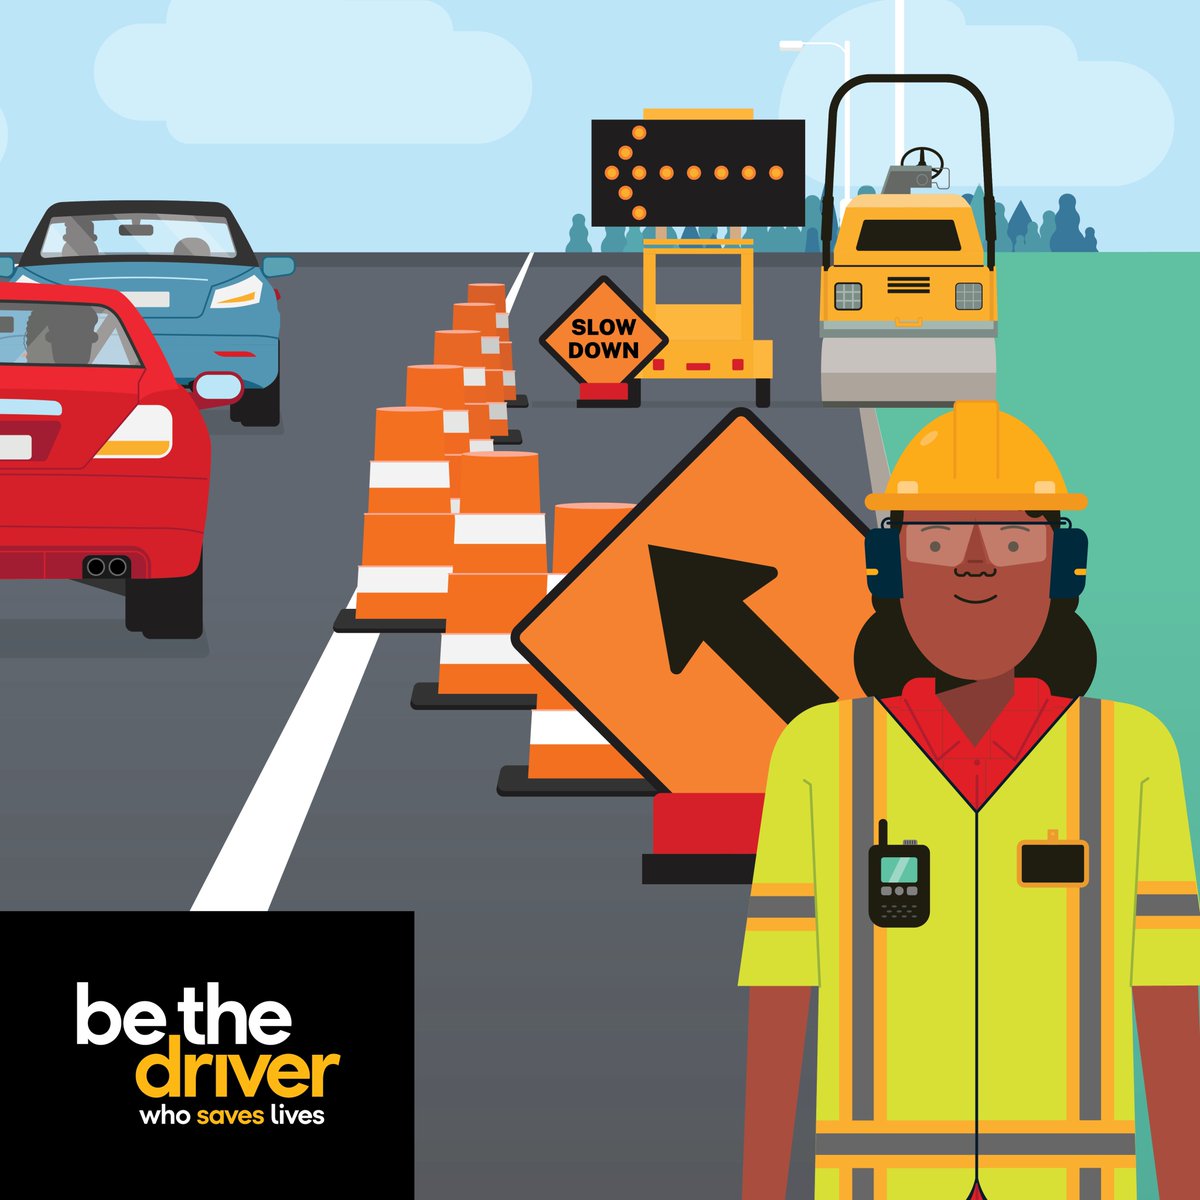 🦺The purpose of road work❓🦺
To build the state’s infrastructure network and make the roads SAFER. 
Do YOUR part, too🚗. 
#StayAlert and #SlowDown when approaching construction👷‍♀️crews.  
#MDOTSafety #MDTraffic #MDCommuters #MontgomeryCountyMD